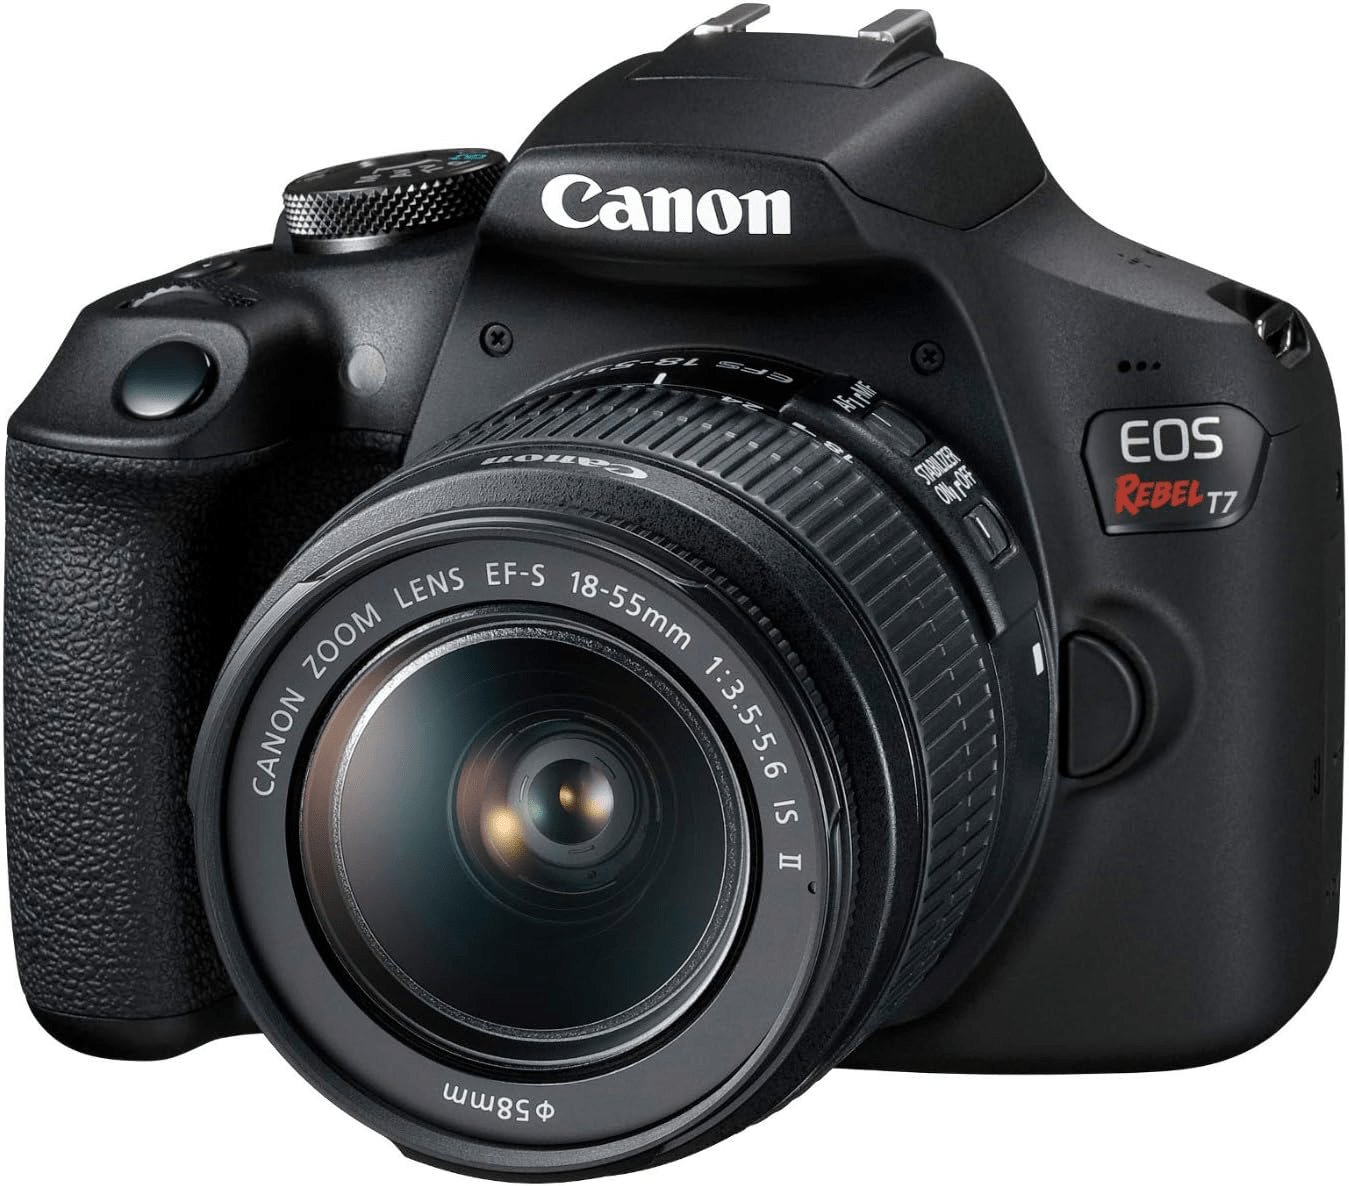 The Canon Rebel T7 - another contender for the best budget camera for OnlyFans.